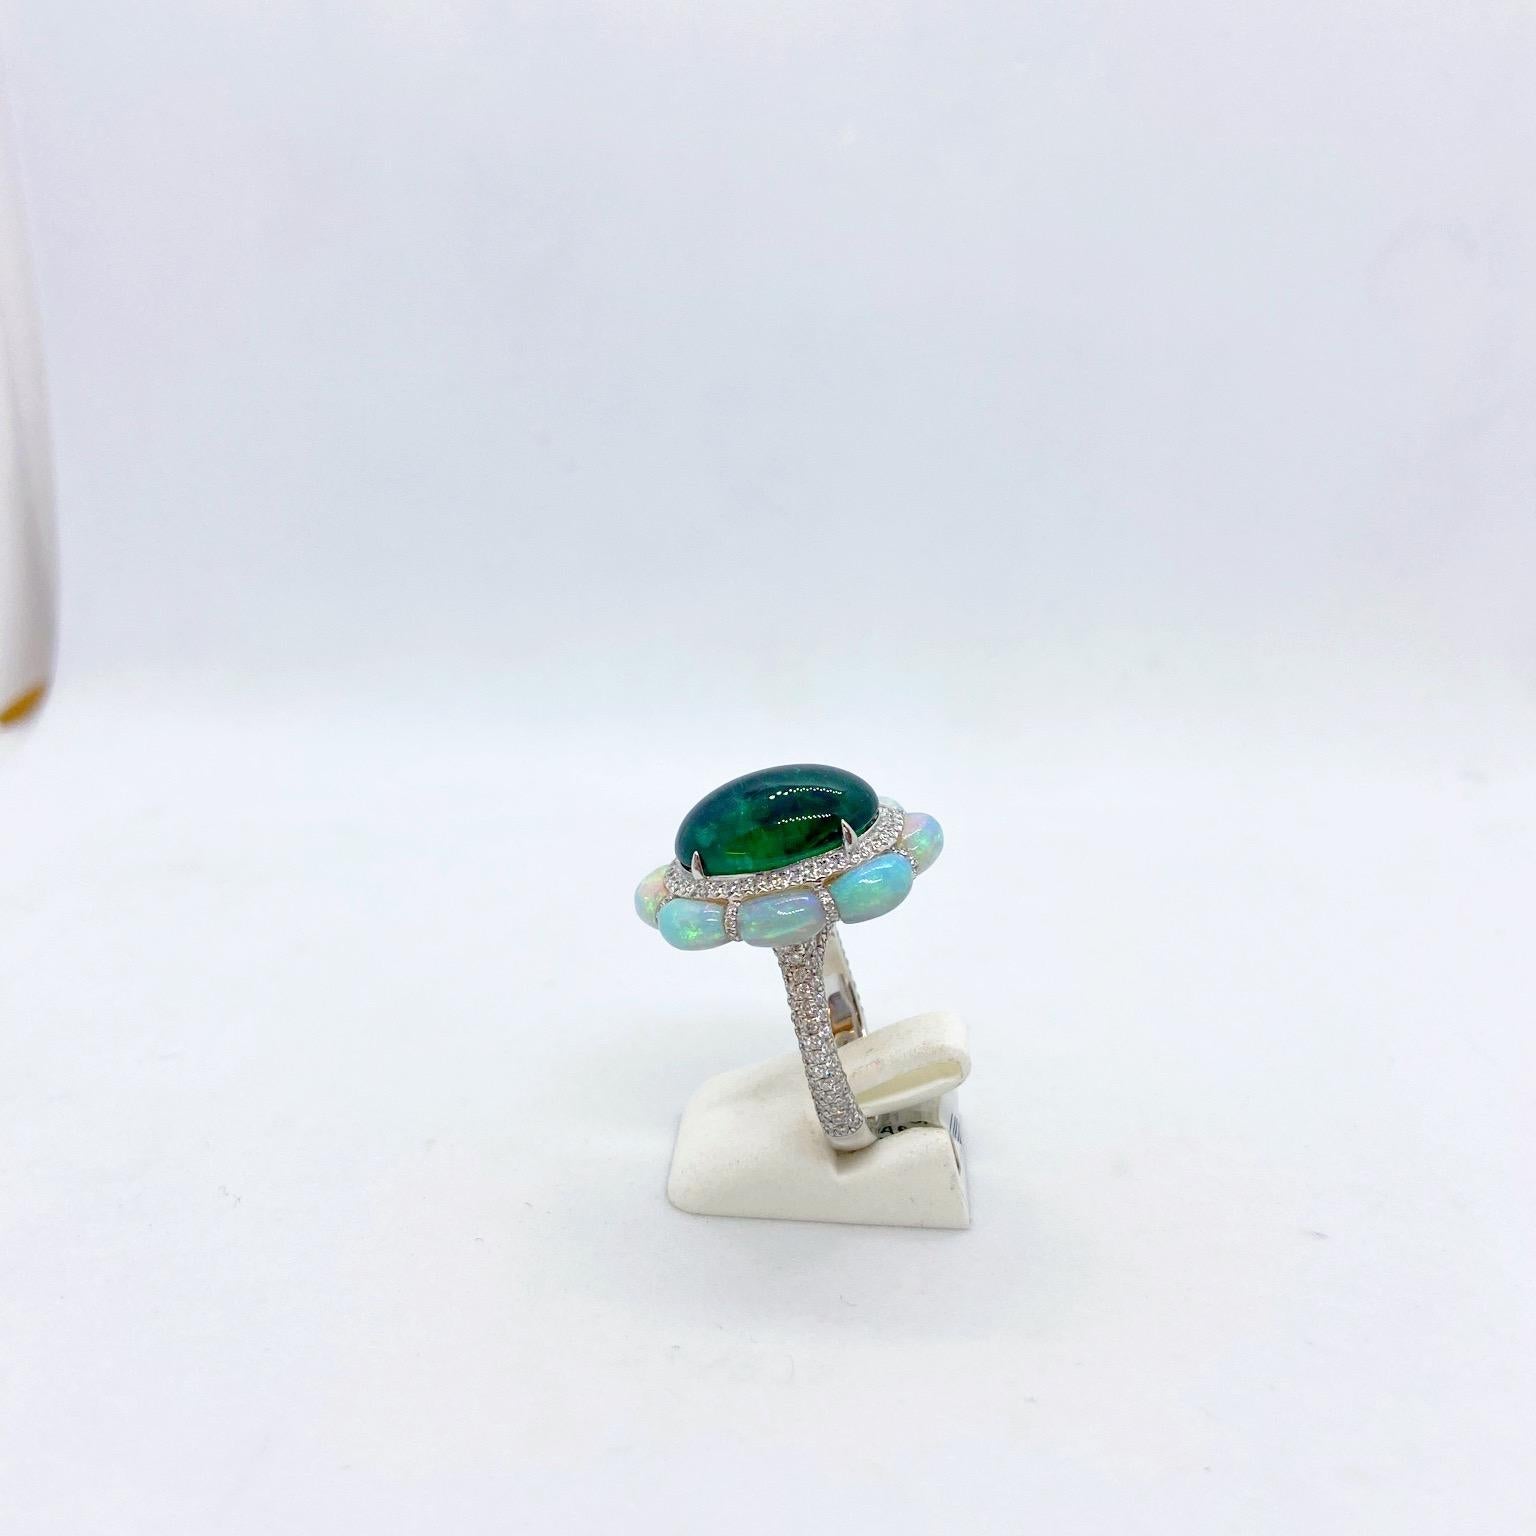 Arunashi 18KT White Gold, 10.11Ct. Cabochon Emerald Ring with Opals & Diamonds For Sale 1